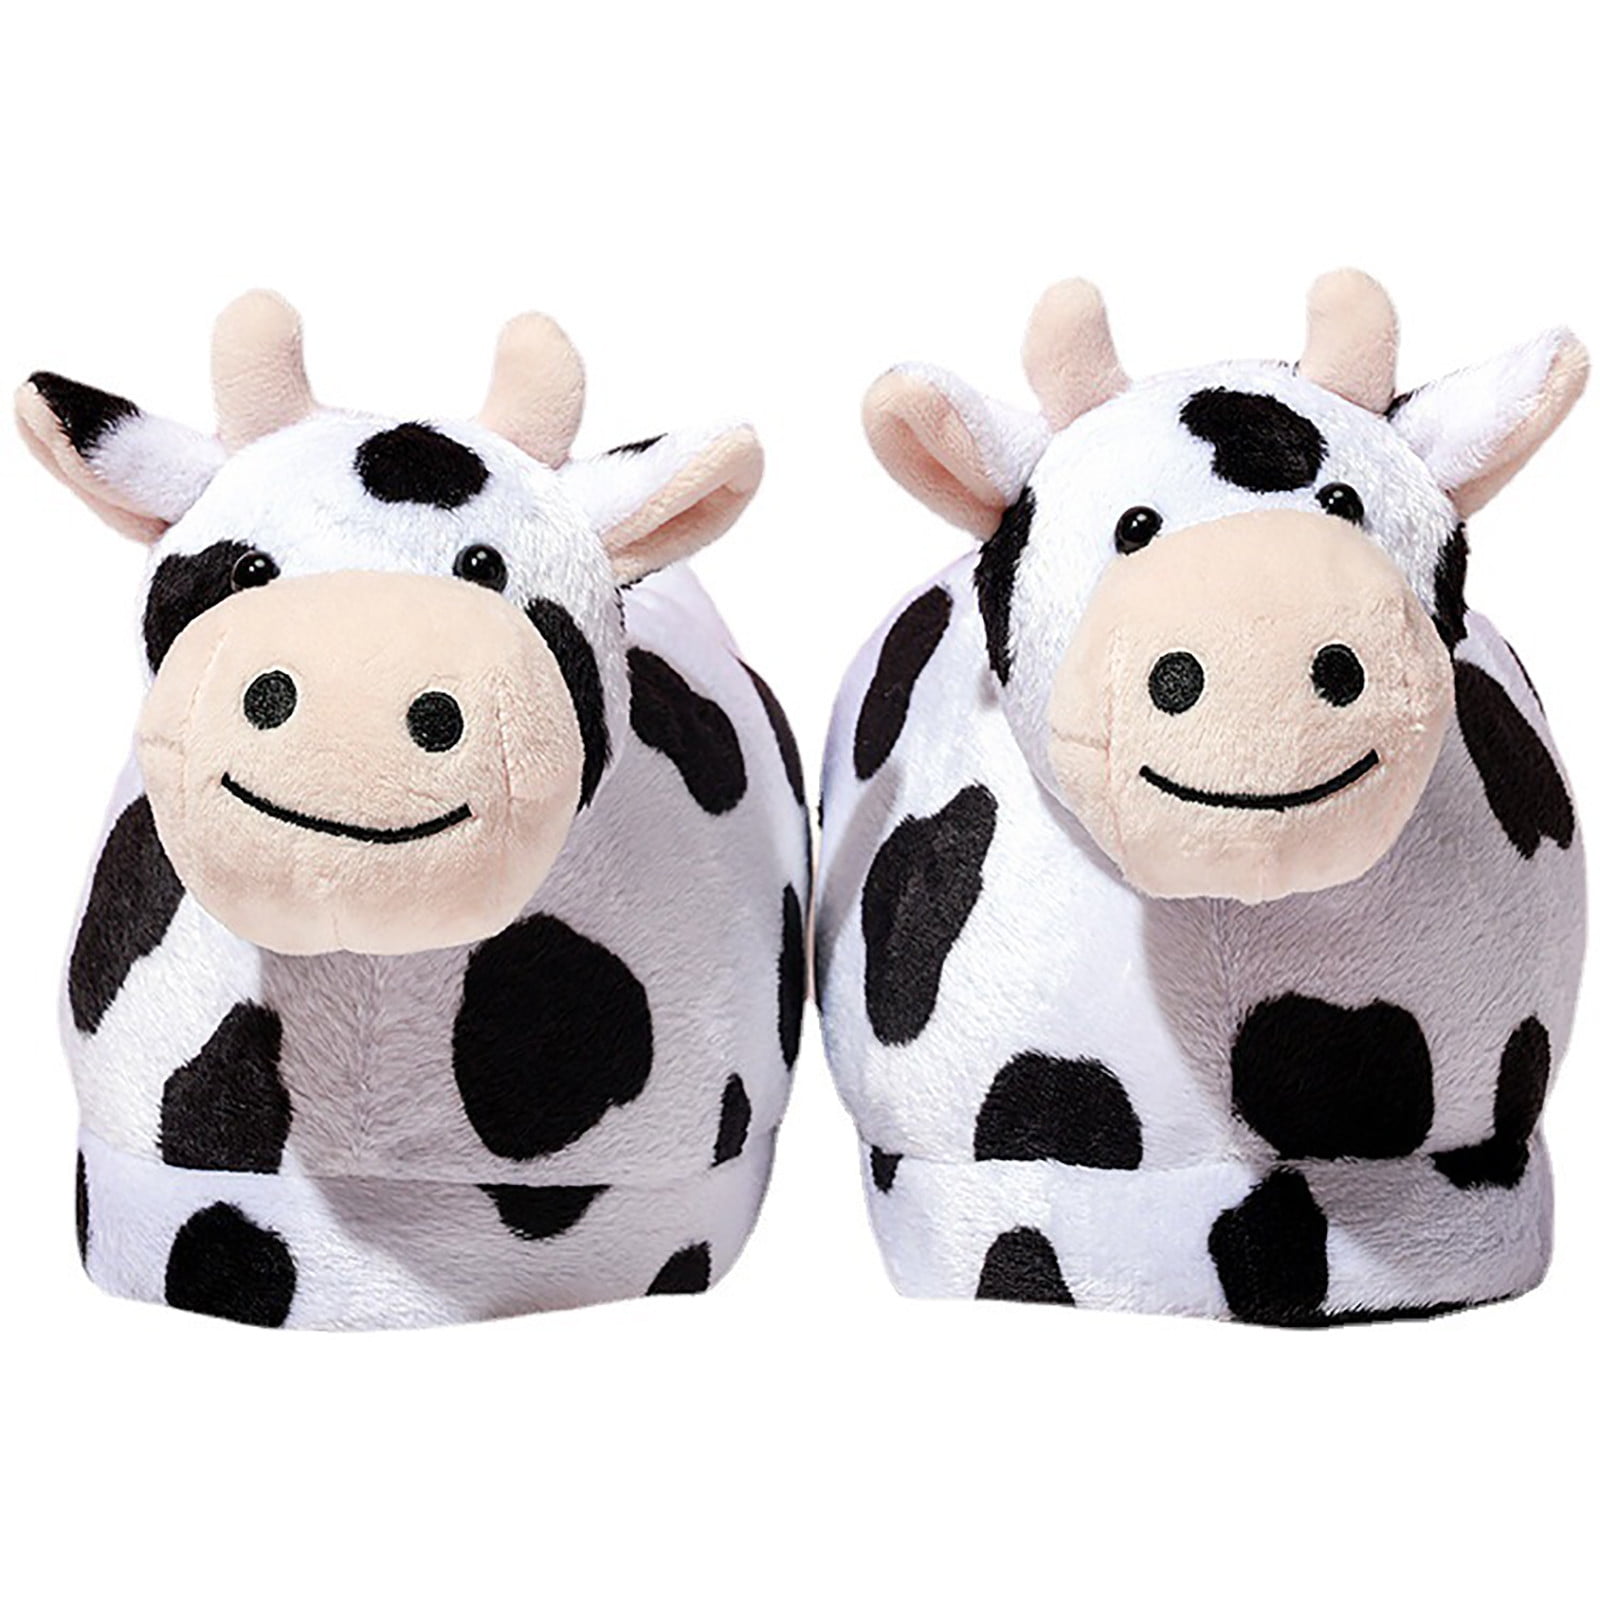 LOVELY QUALITY LADIES/GIRLS CUTE COW SLIPPERS SO WARM & COMFORTABLE 